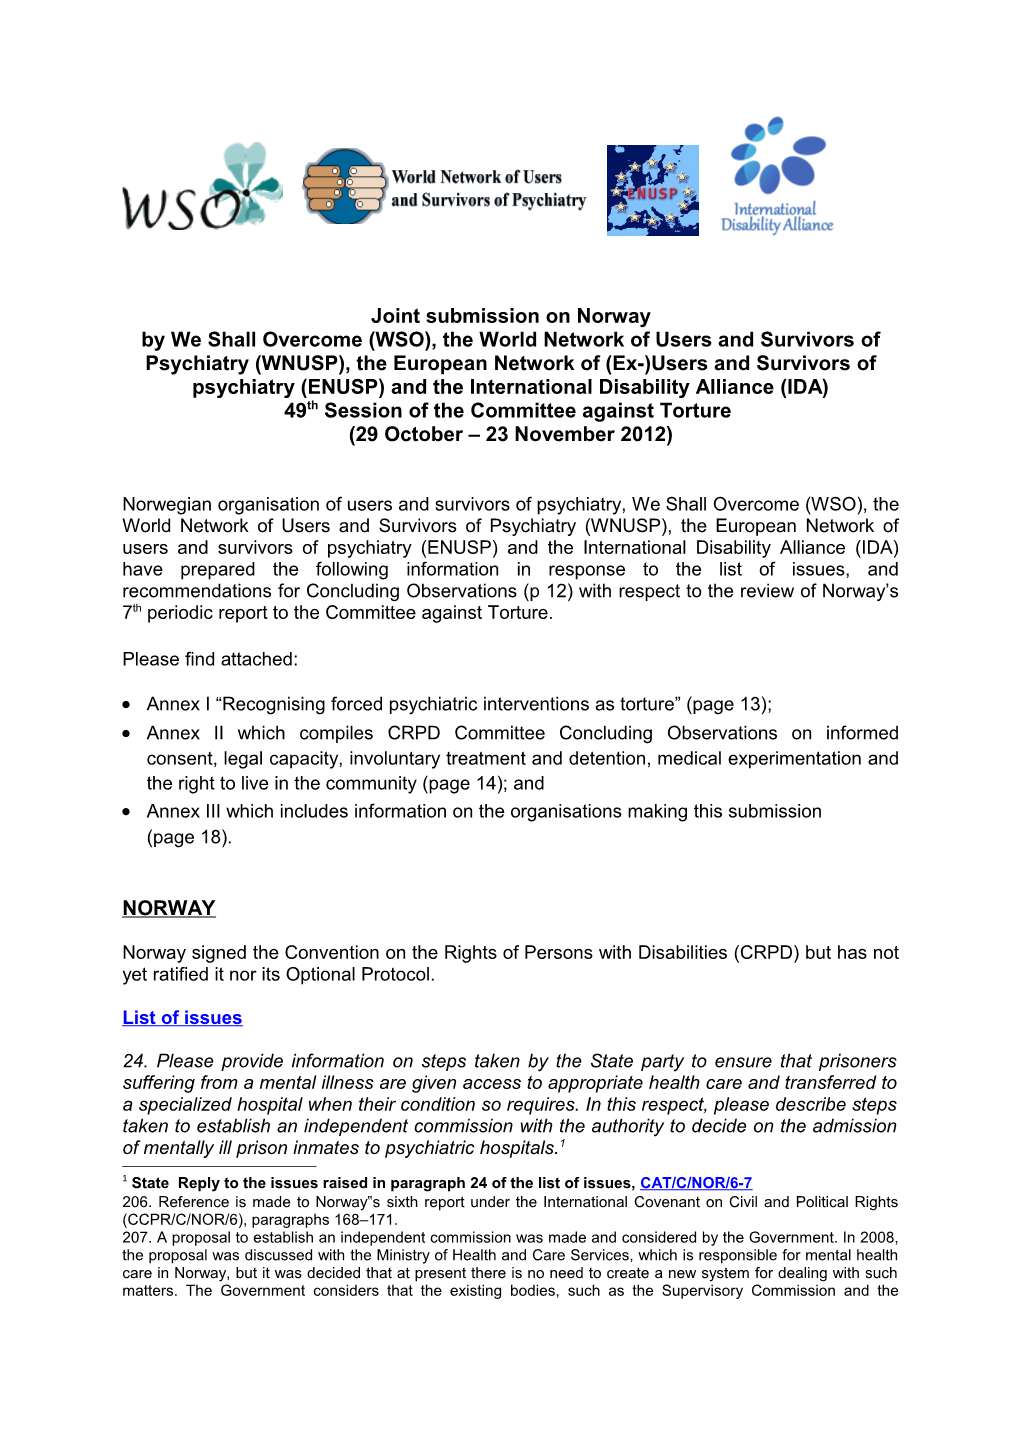 Joint WSO, ENUSP, WNUSP & IDA Submission on Norway